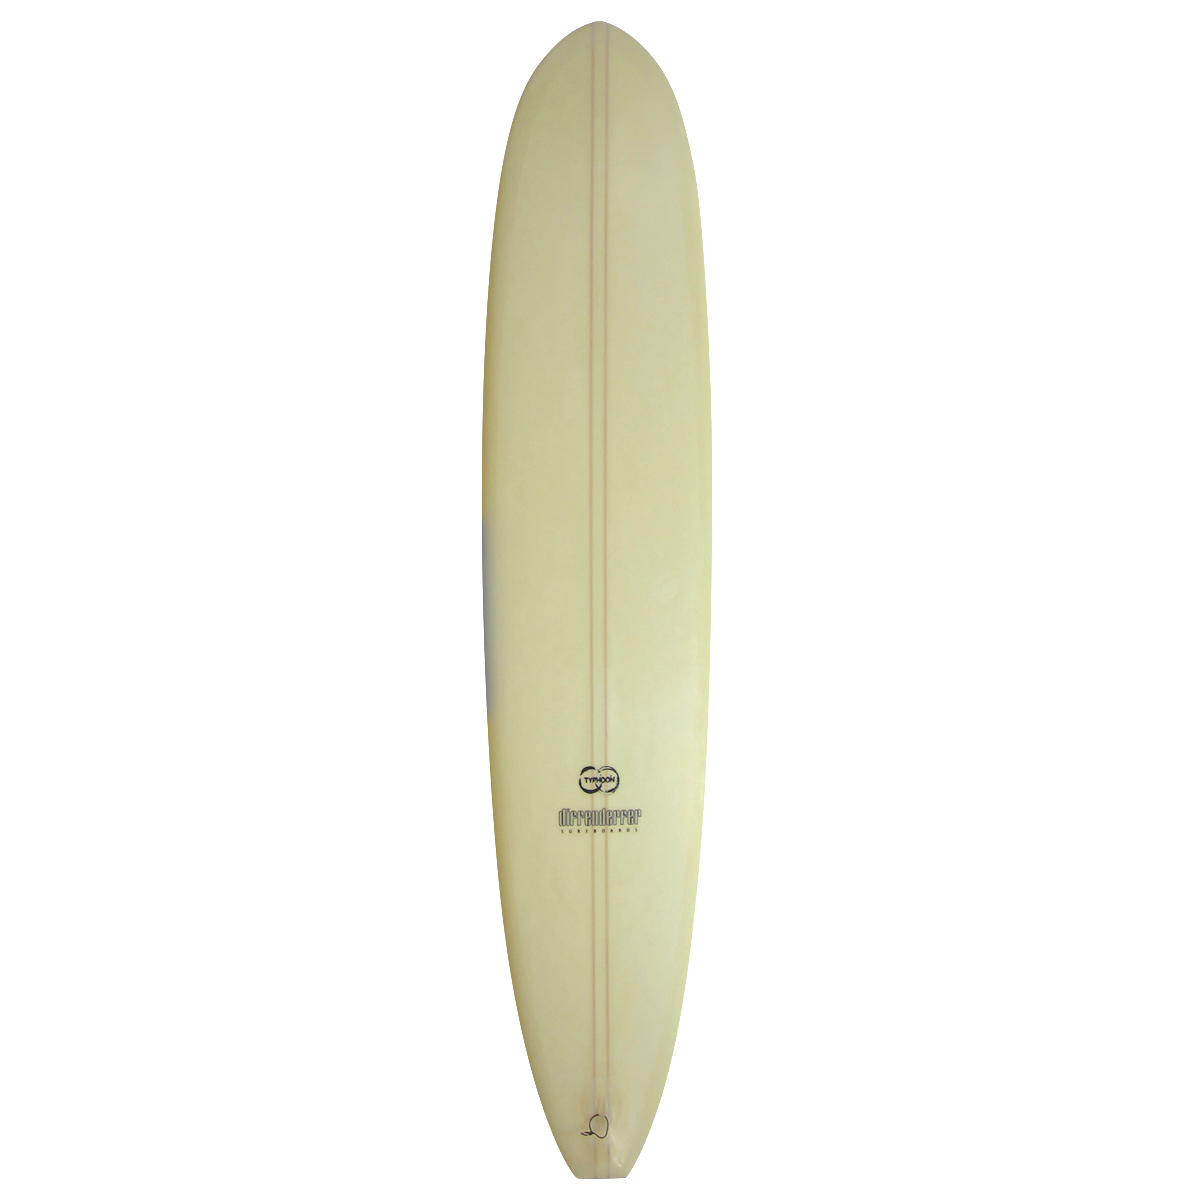 Typhoon Surfboards / 9`5 shaped by Mike Diffenderfer ♯44